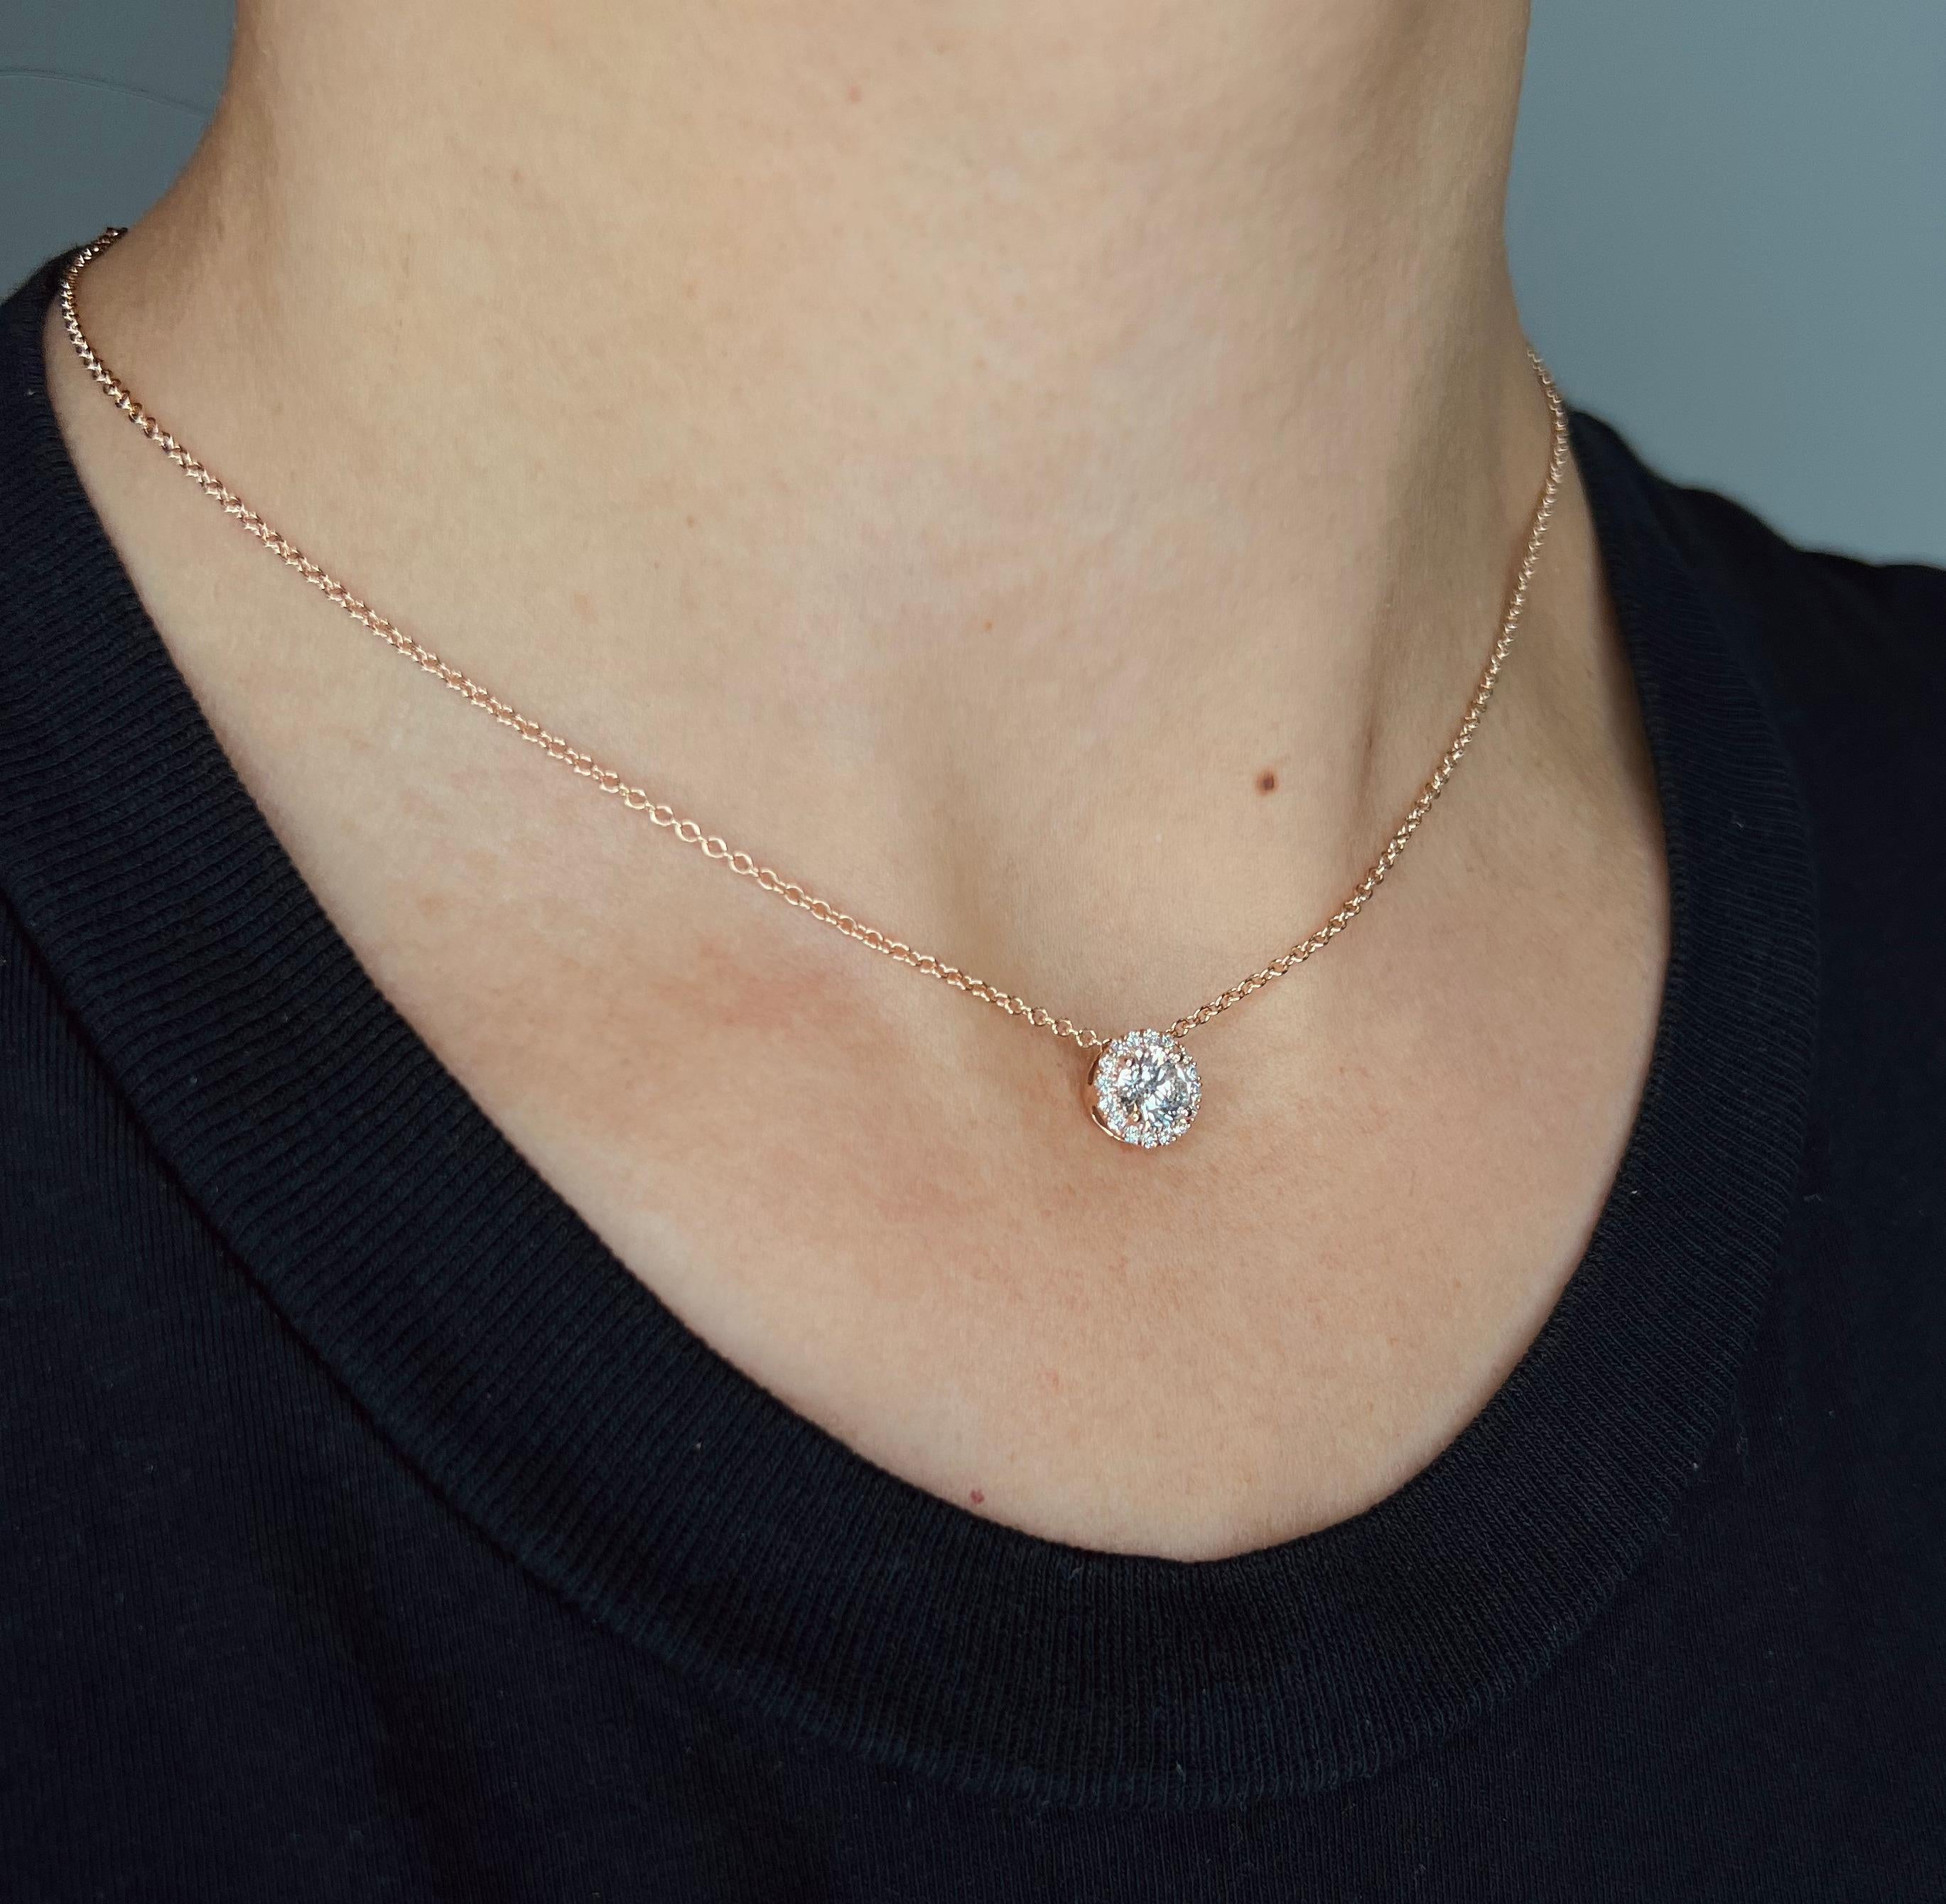 This diamond circle pendant provides a glowing chic look.
Metal: 14k Gold
Diamond Total Carats (Includes 0.15ct halo): 1.15ct (1.00ct Center)
Diamond Cut: Round Natural Diamonds (Not Lab Grown)
Diamond Clarity: VS
Diamond Color: F
Color: White